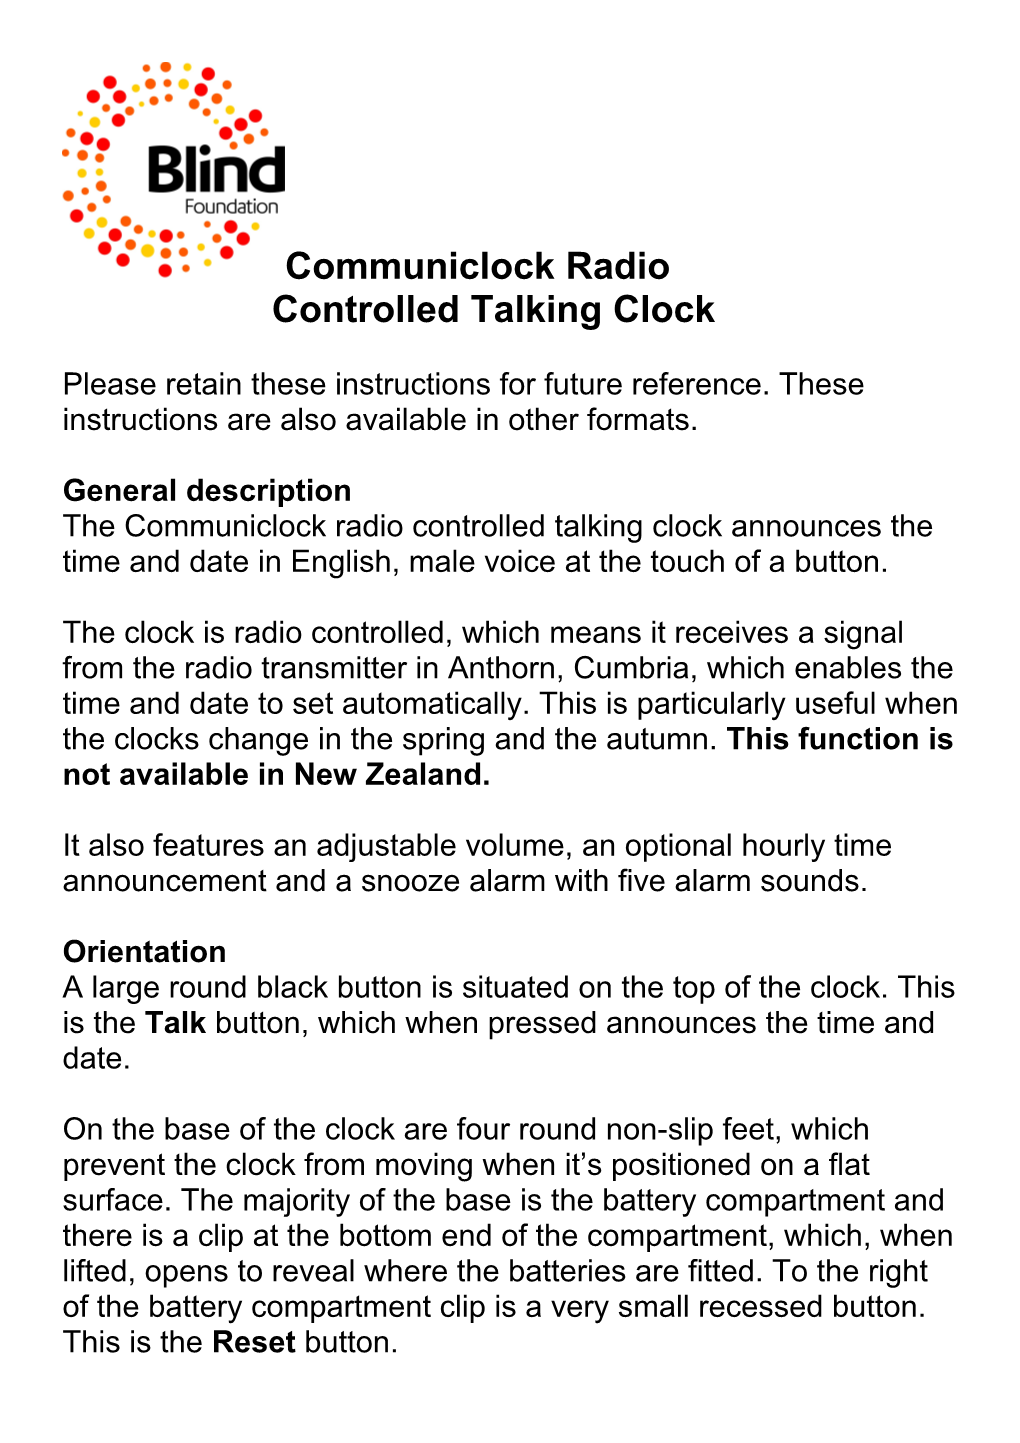 Controlled Talking Clock